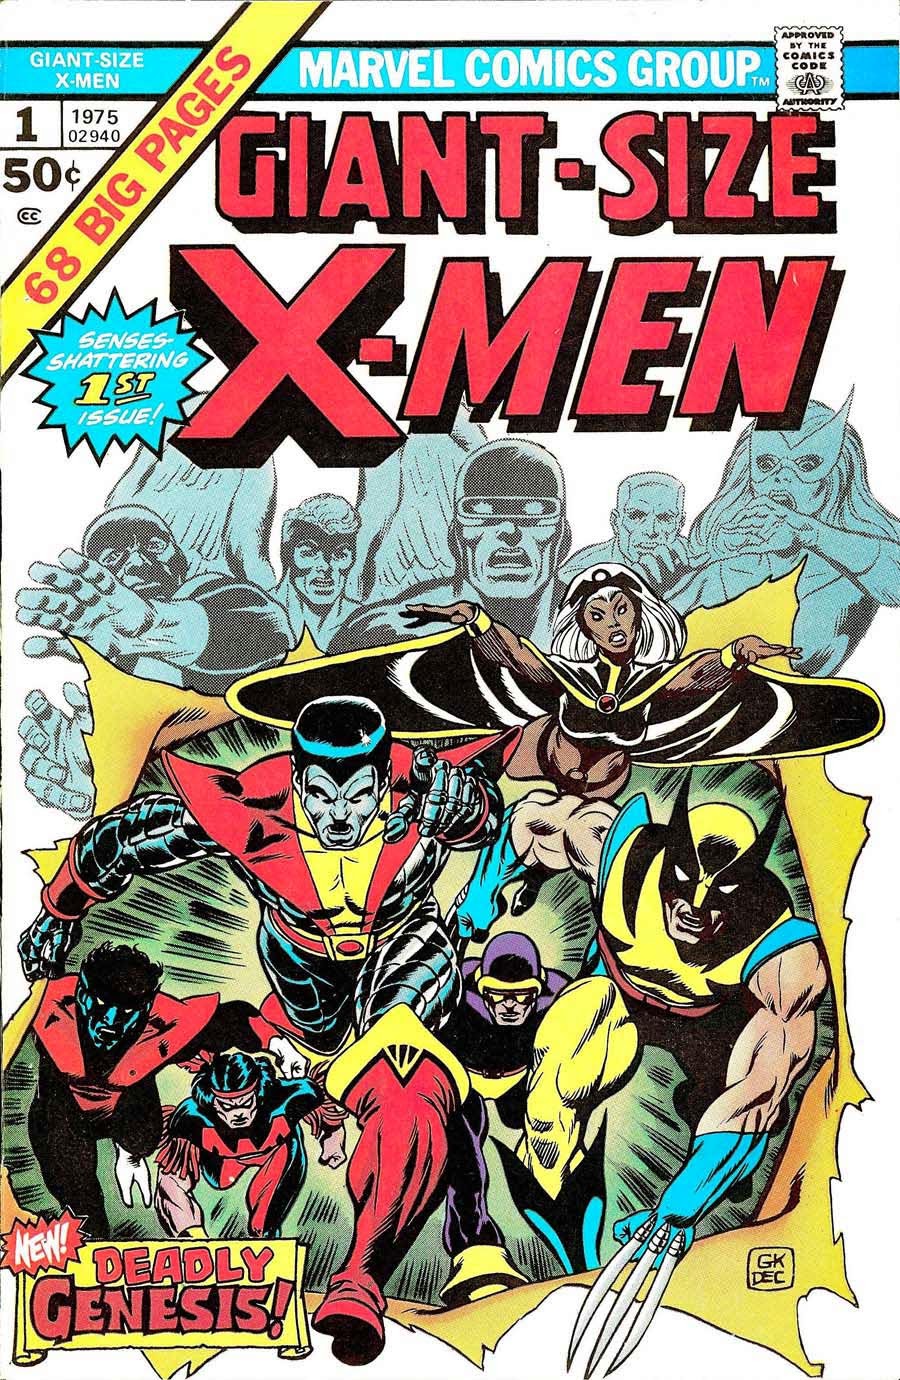 Giant-size X-men #1 Dave Cockum marvel key issue 1970s bronze age comic book pge cover - 1st appearance